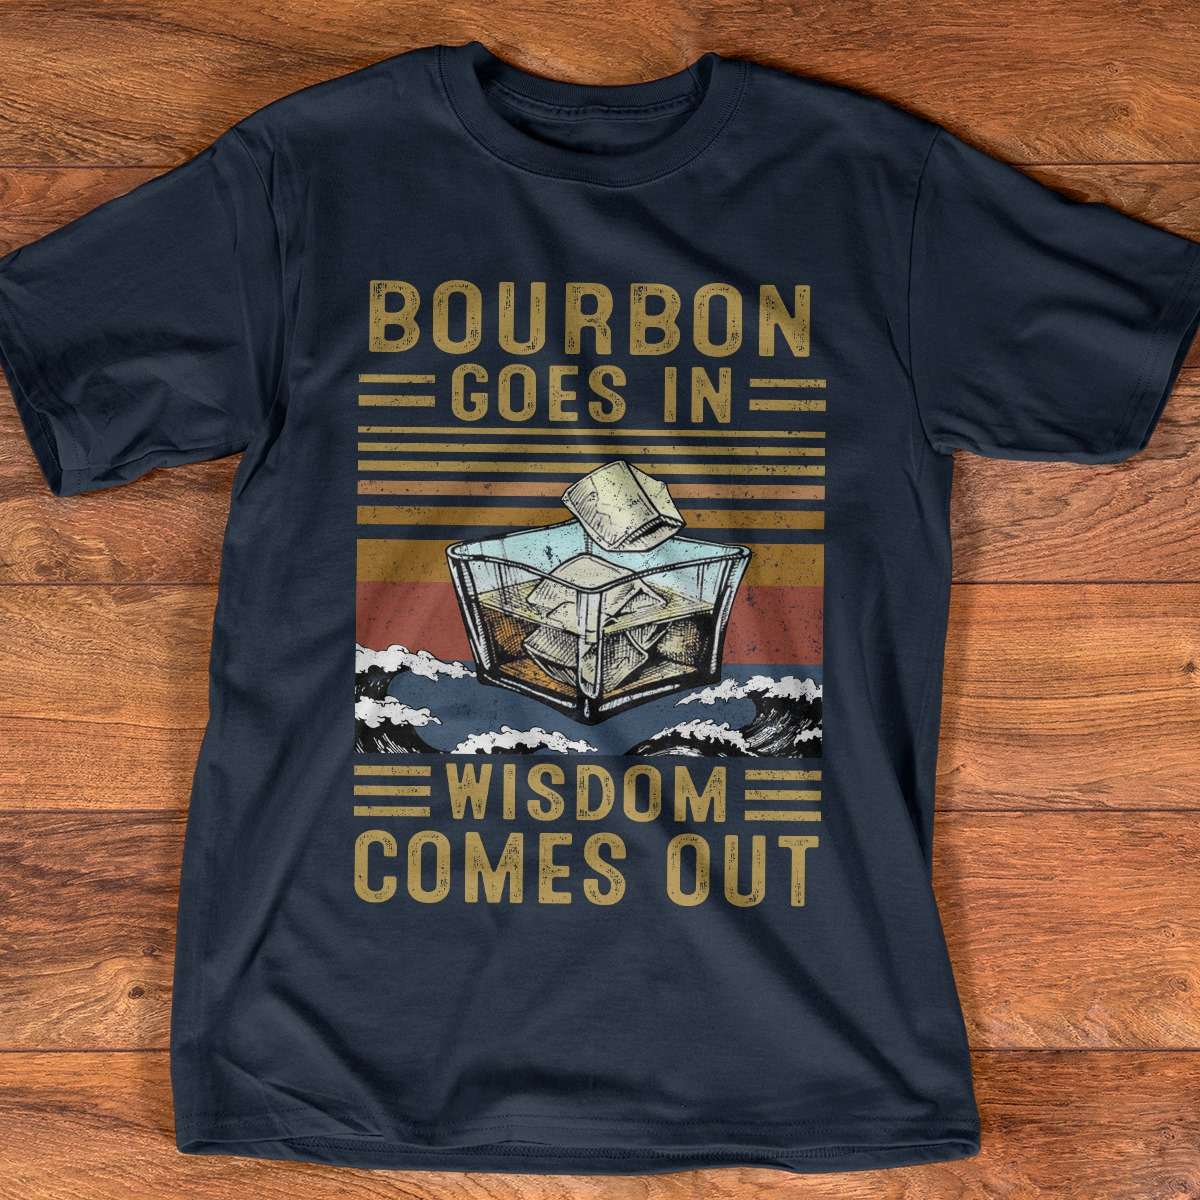 Bourbon goes in wisdom comes out